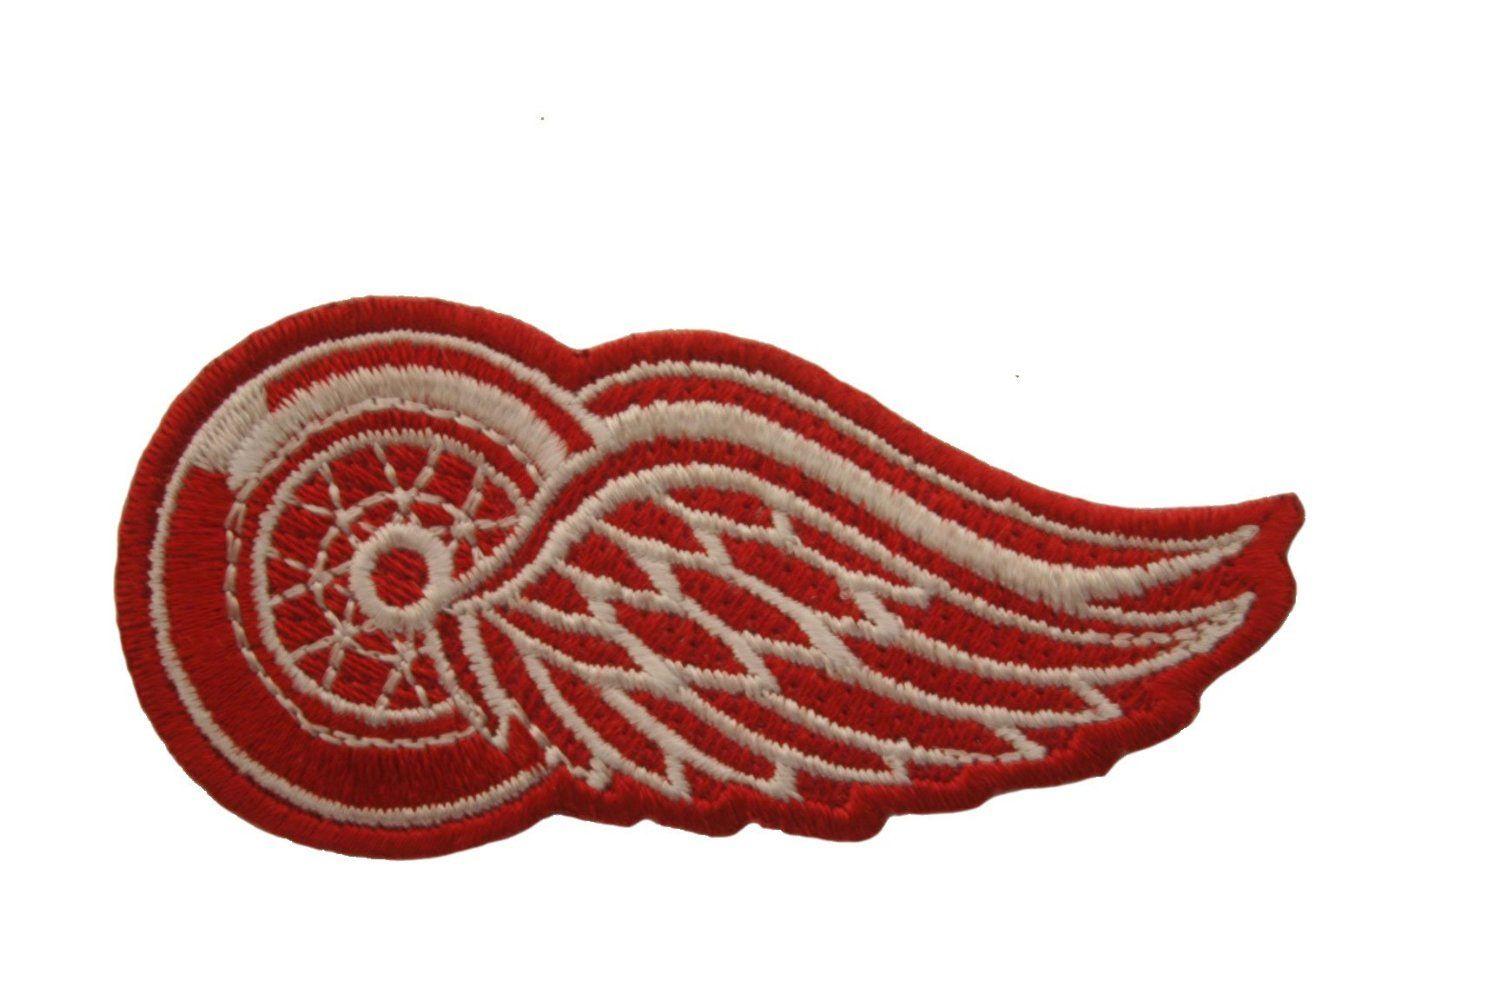 Red Hockey Logo - DETROIT RED WINGS NHL HOCKEY LOGO EMBROIDERED IRON ON PATCH CREST ...